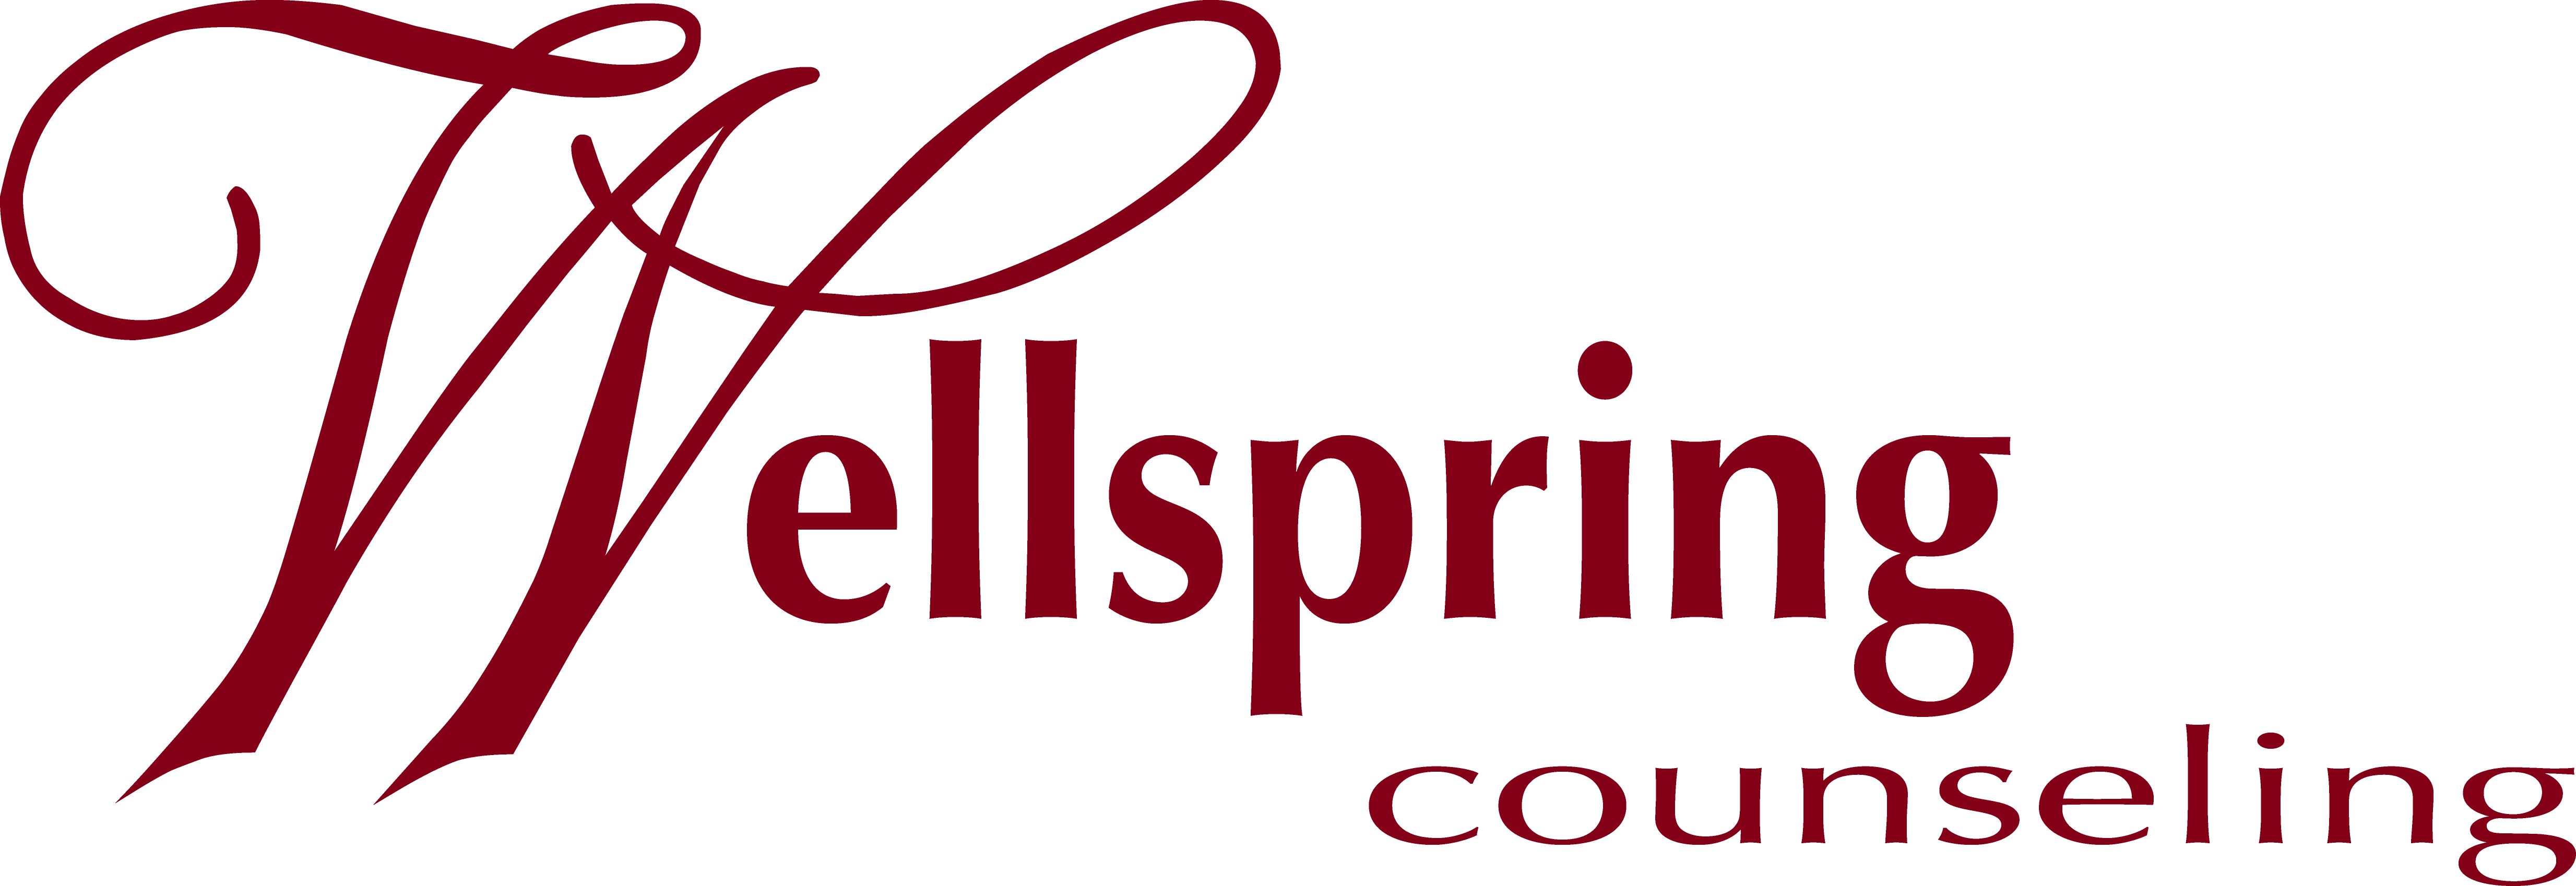 Wellspring Counseling